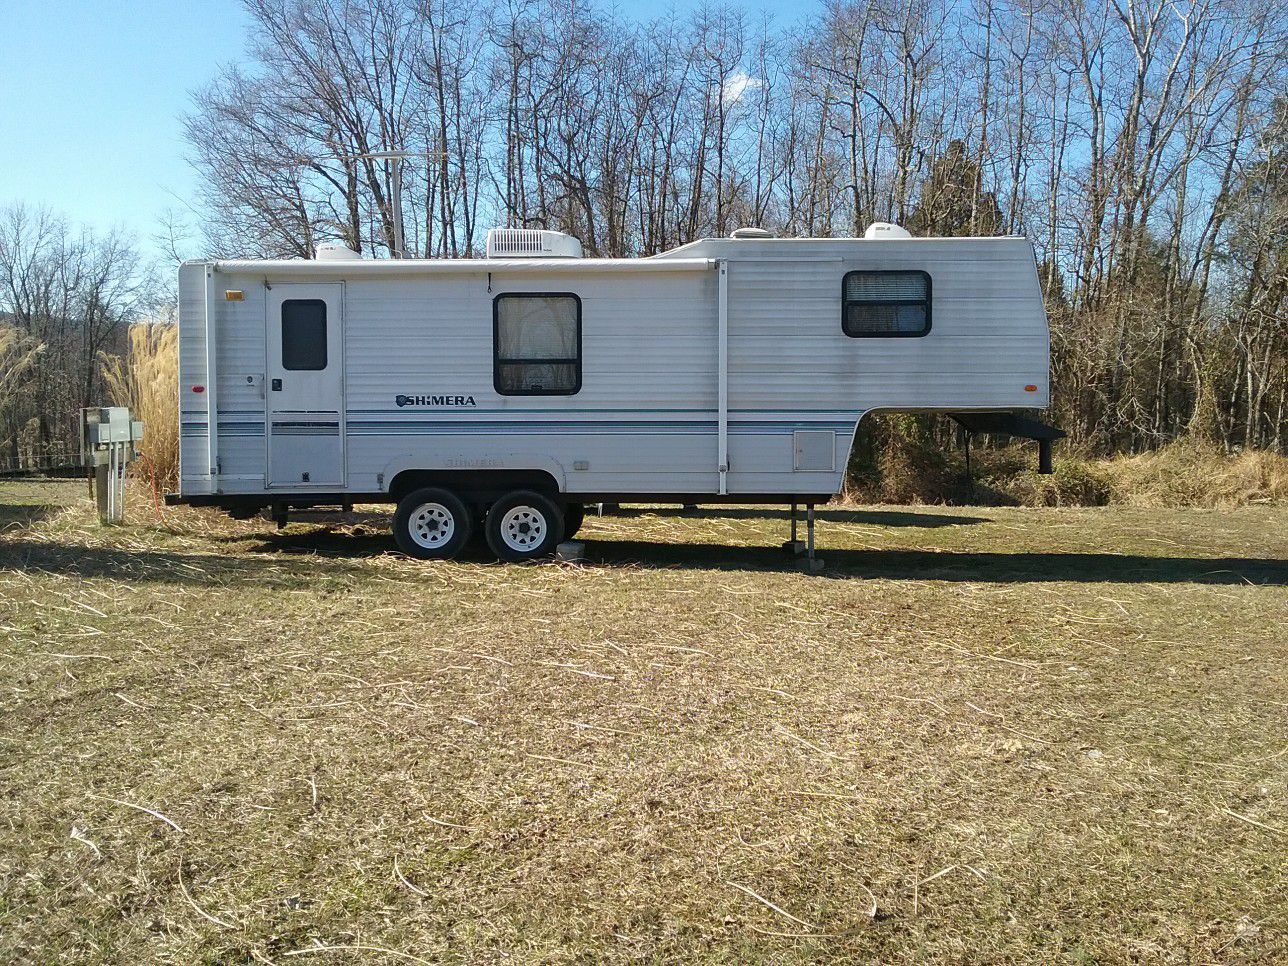 Photo 5th wheel Camper in Great Condition!